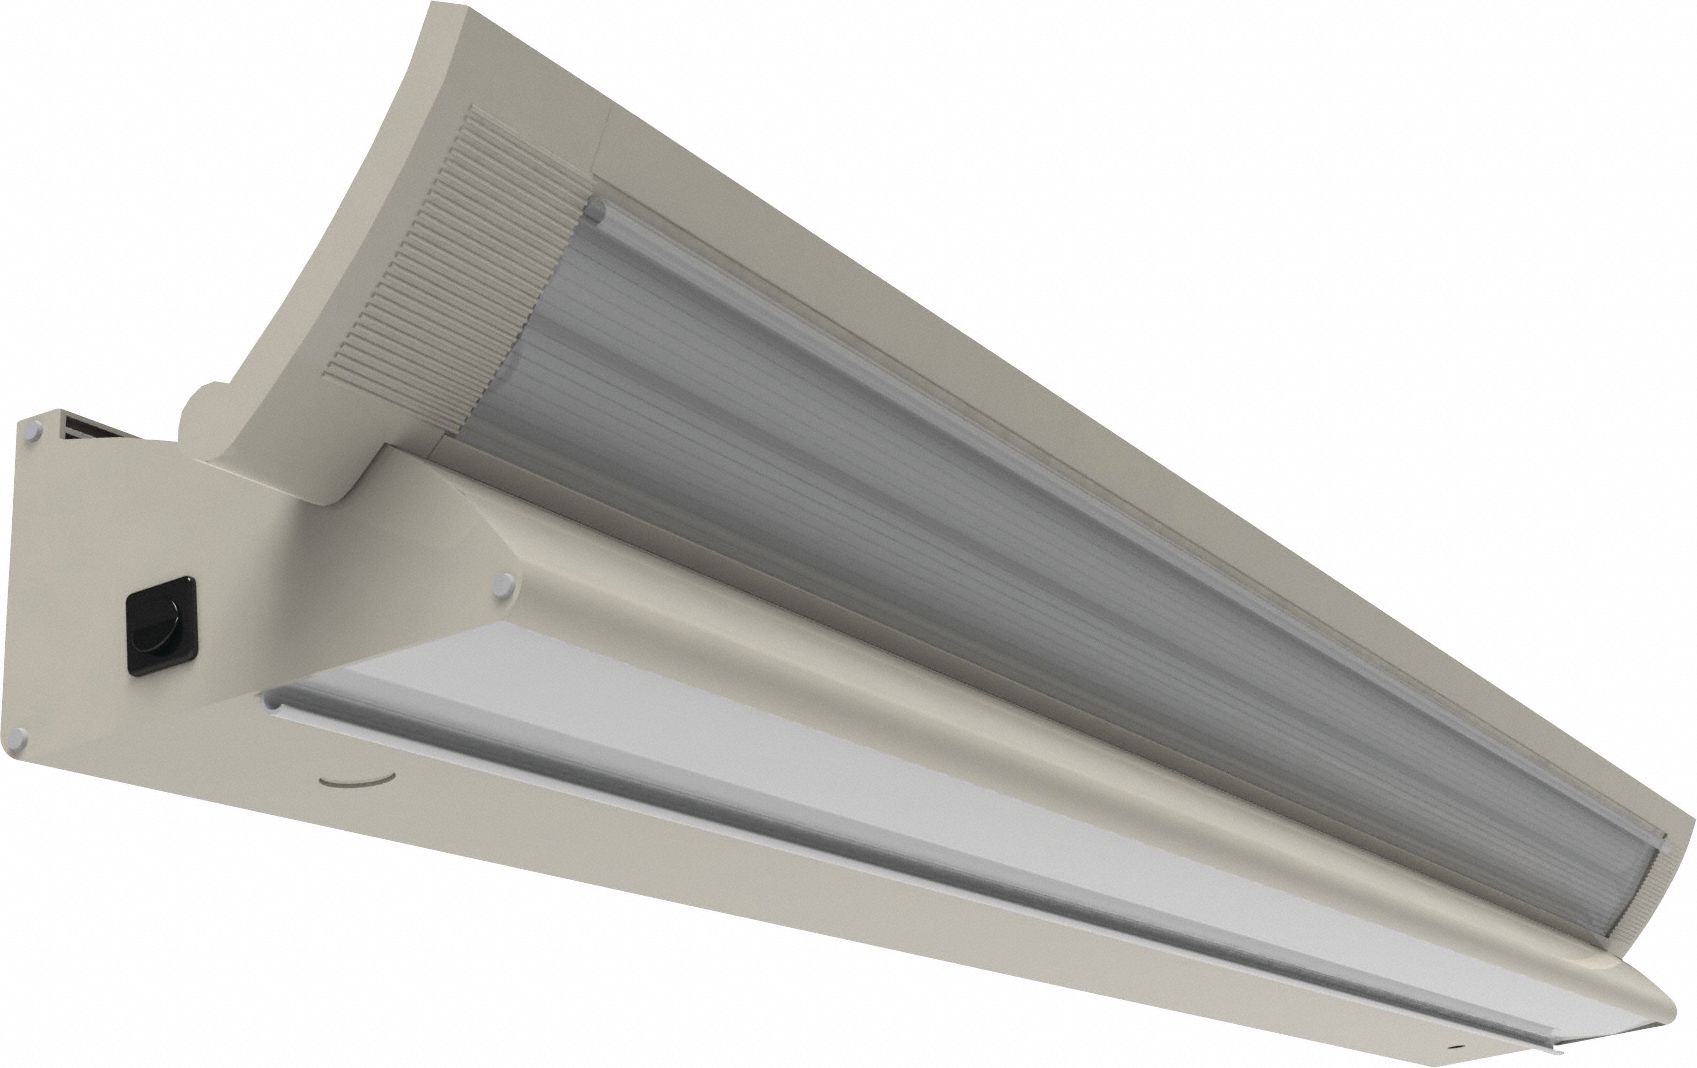 Lamp: Dimmable, 120 to 277V AC, Integrated LED, White Housing, 102 W Max. Fixture Watt